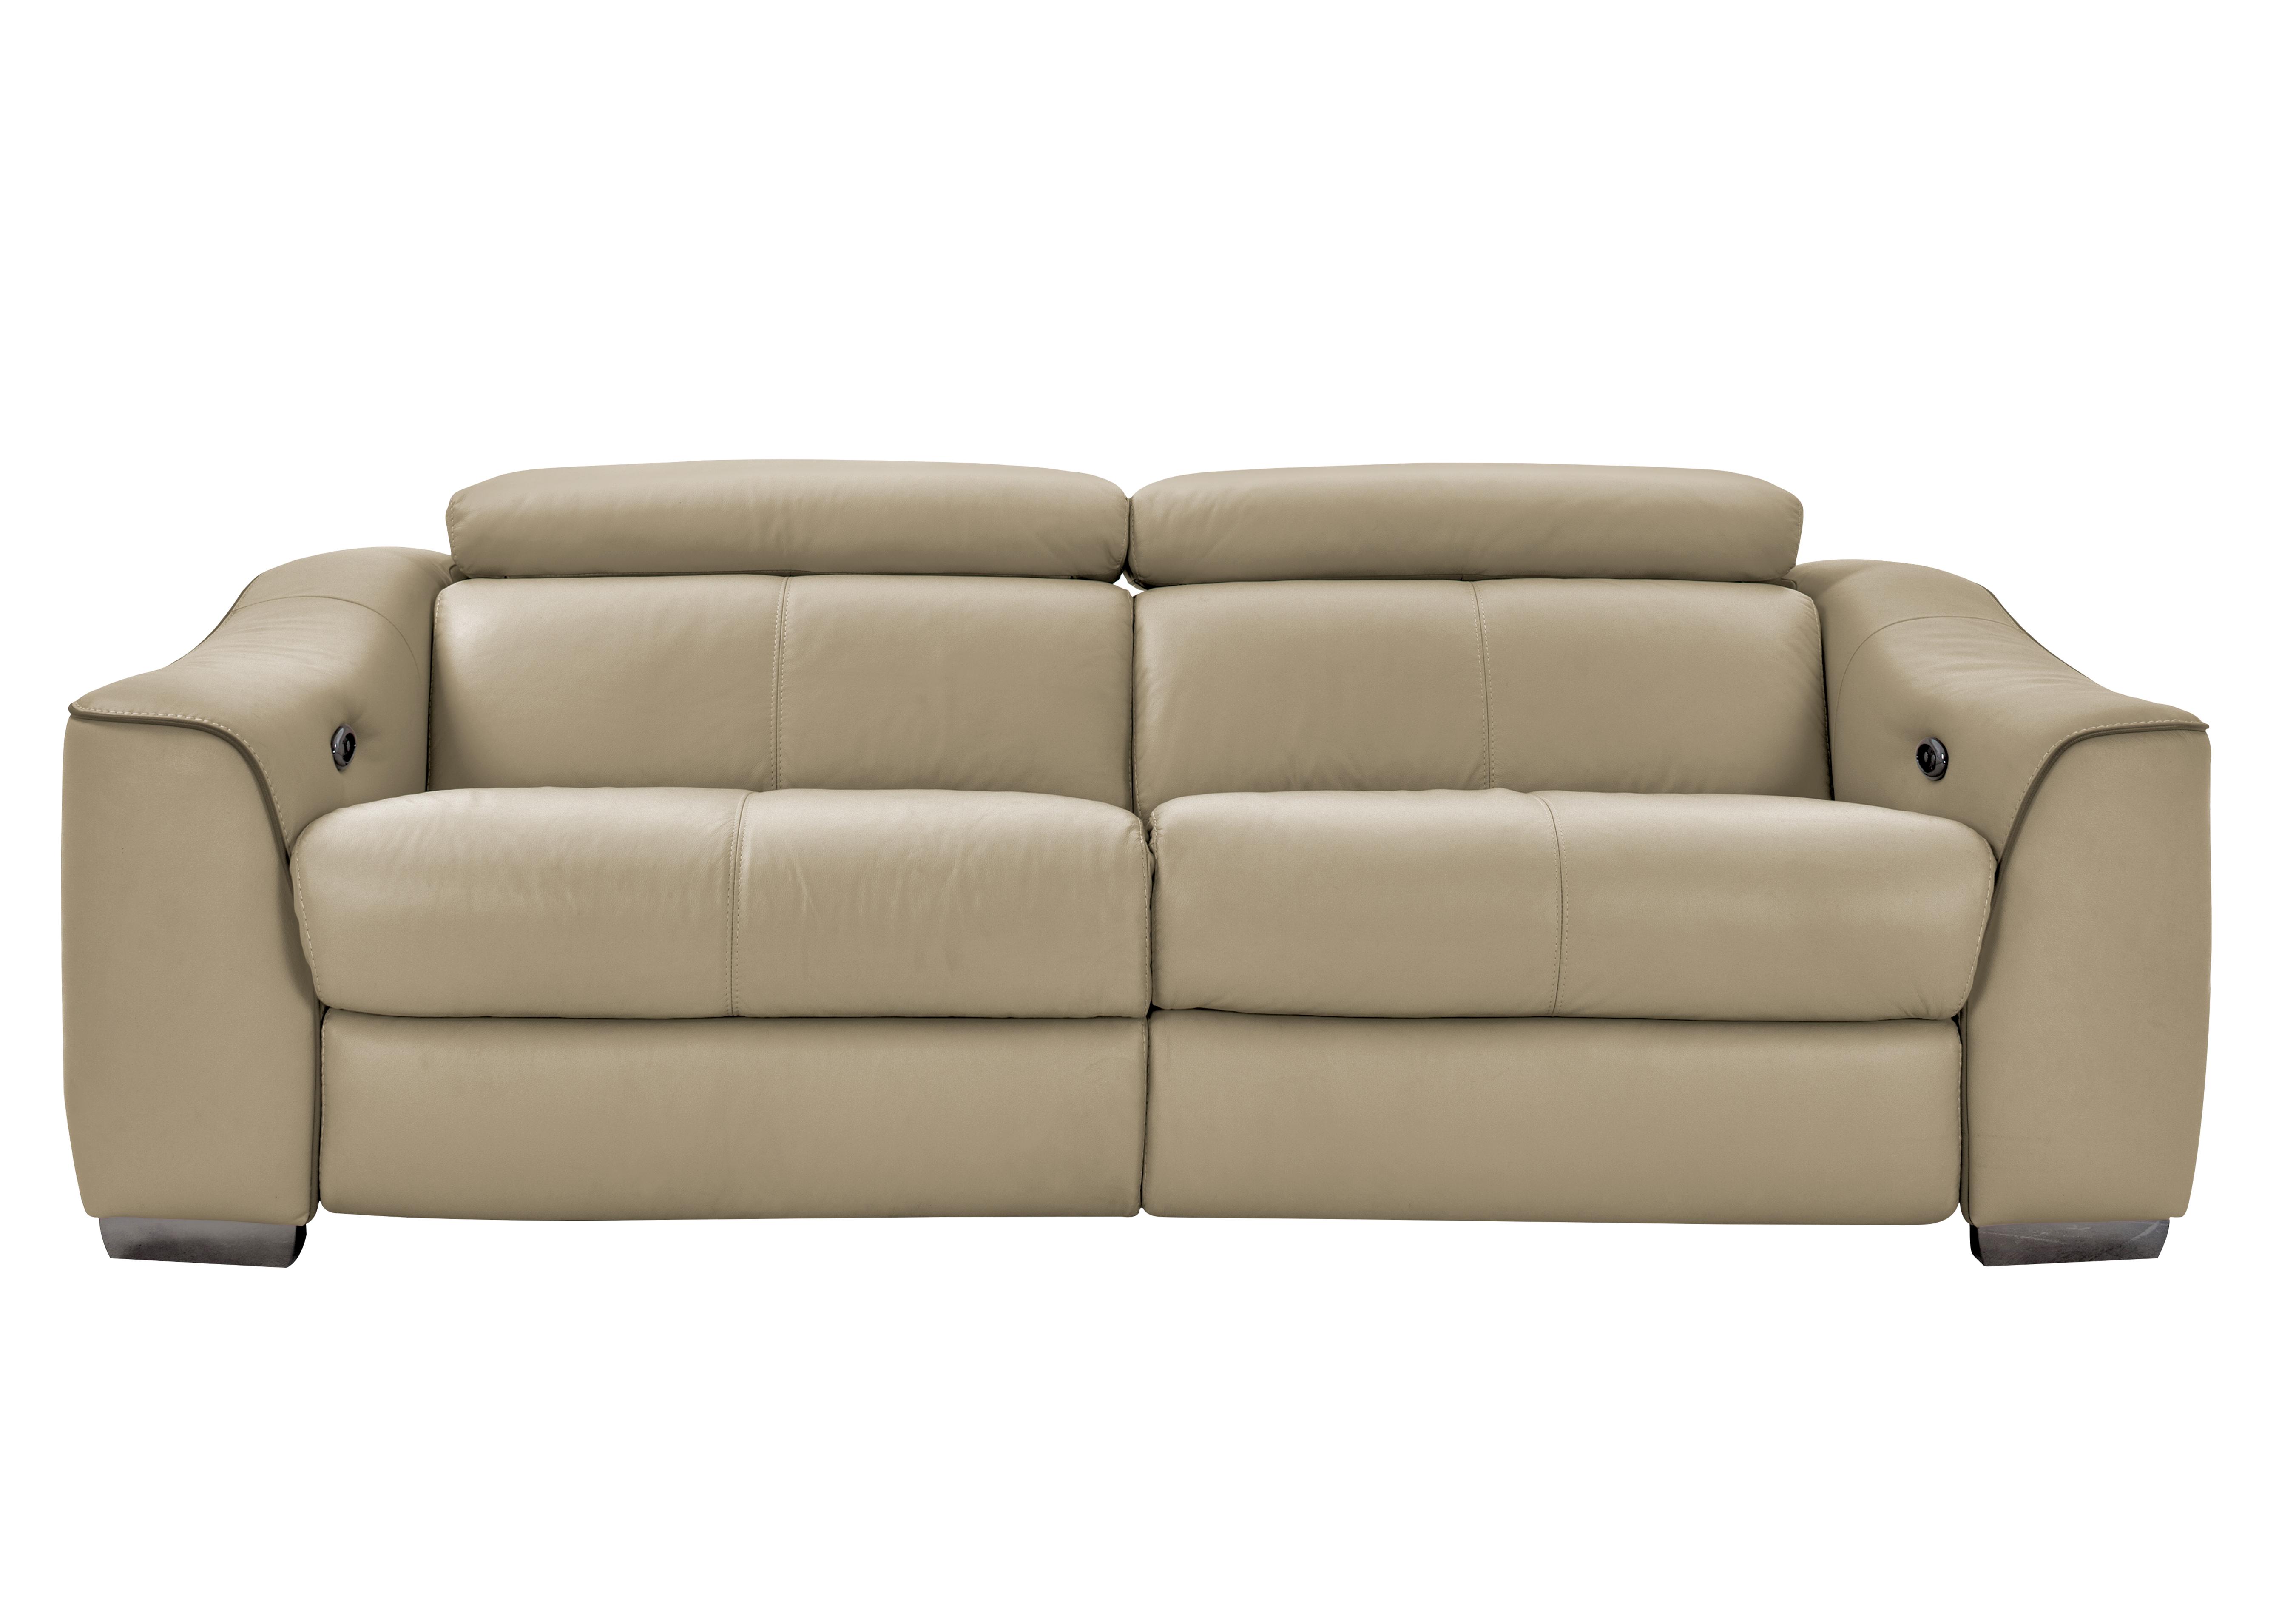 Elixir 3 Seater Leather Sofa Bed in Bv-039c Pebble on Furniture Village